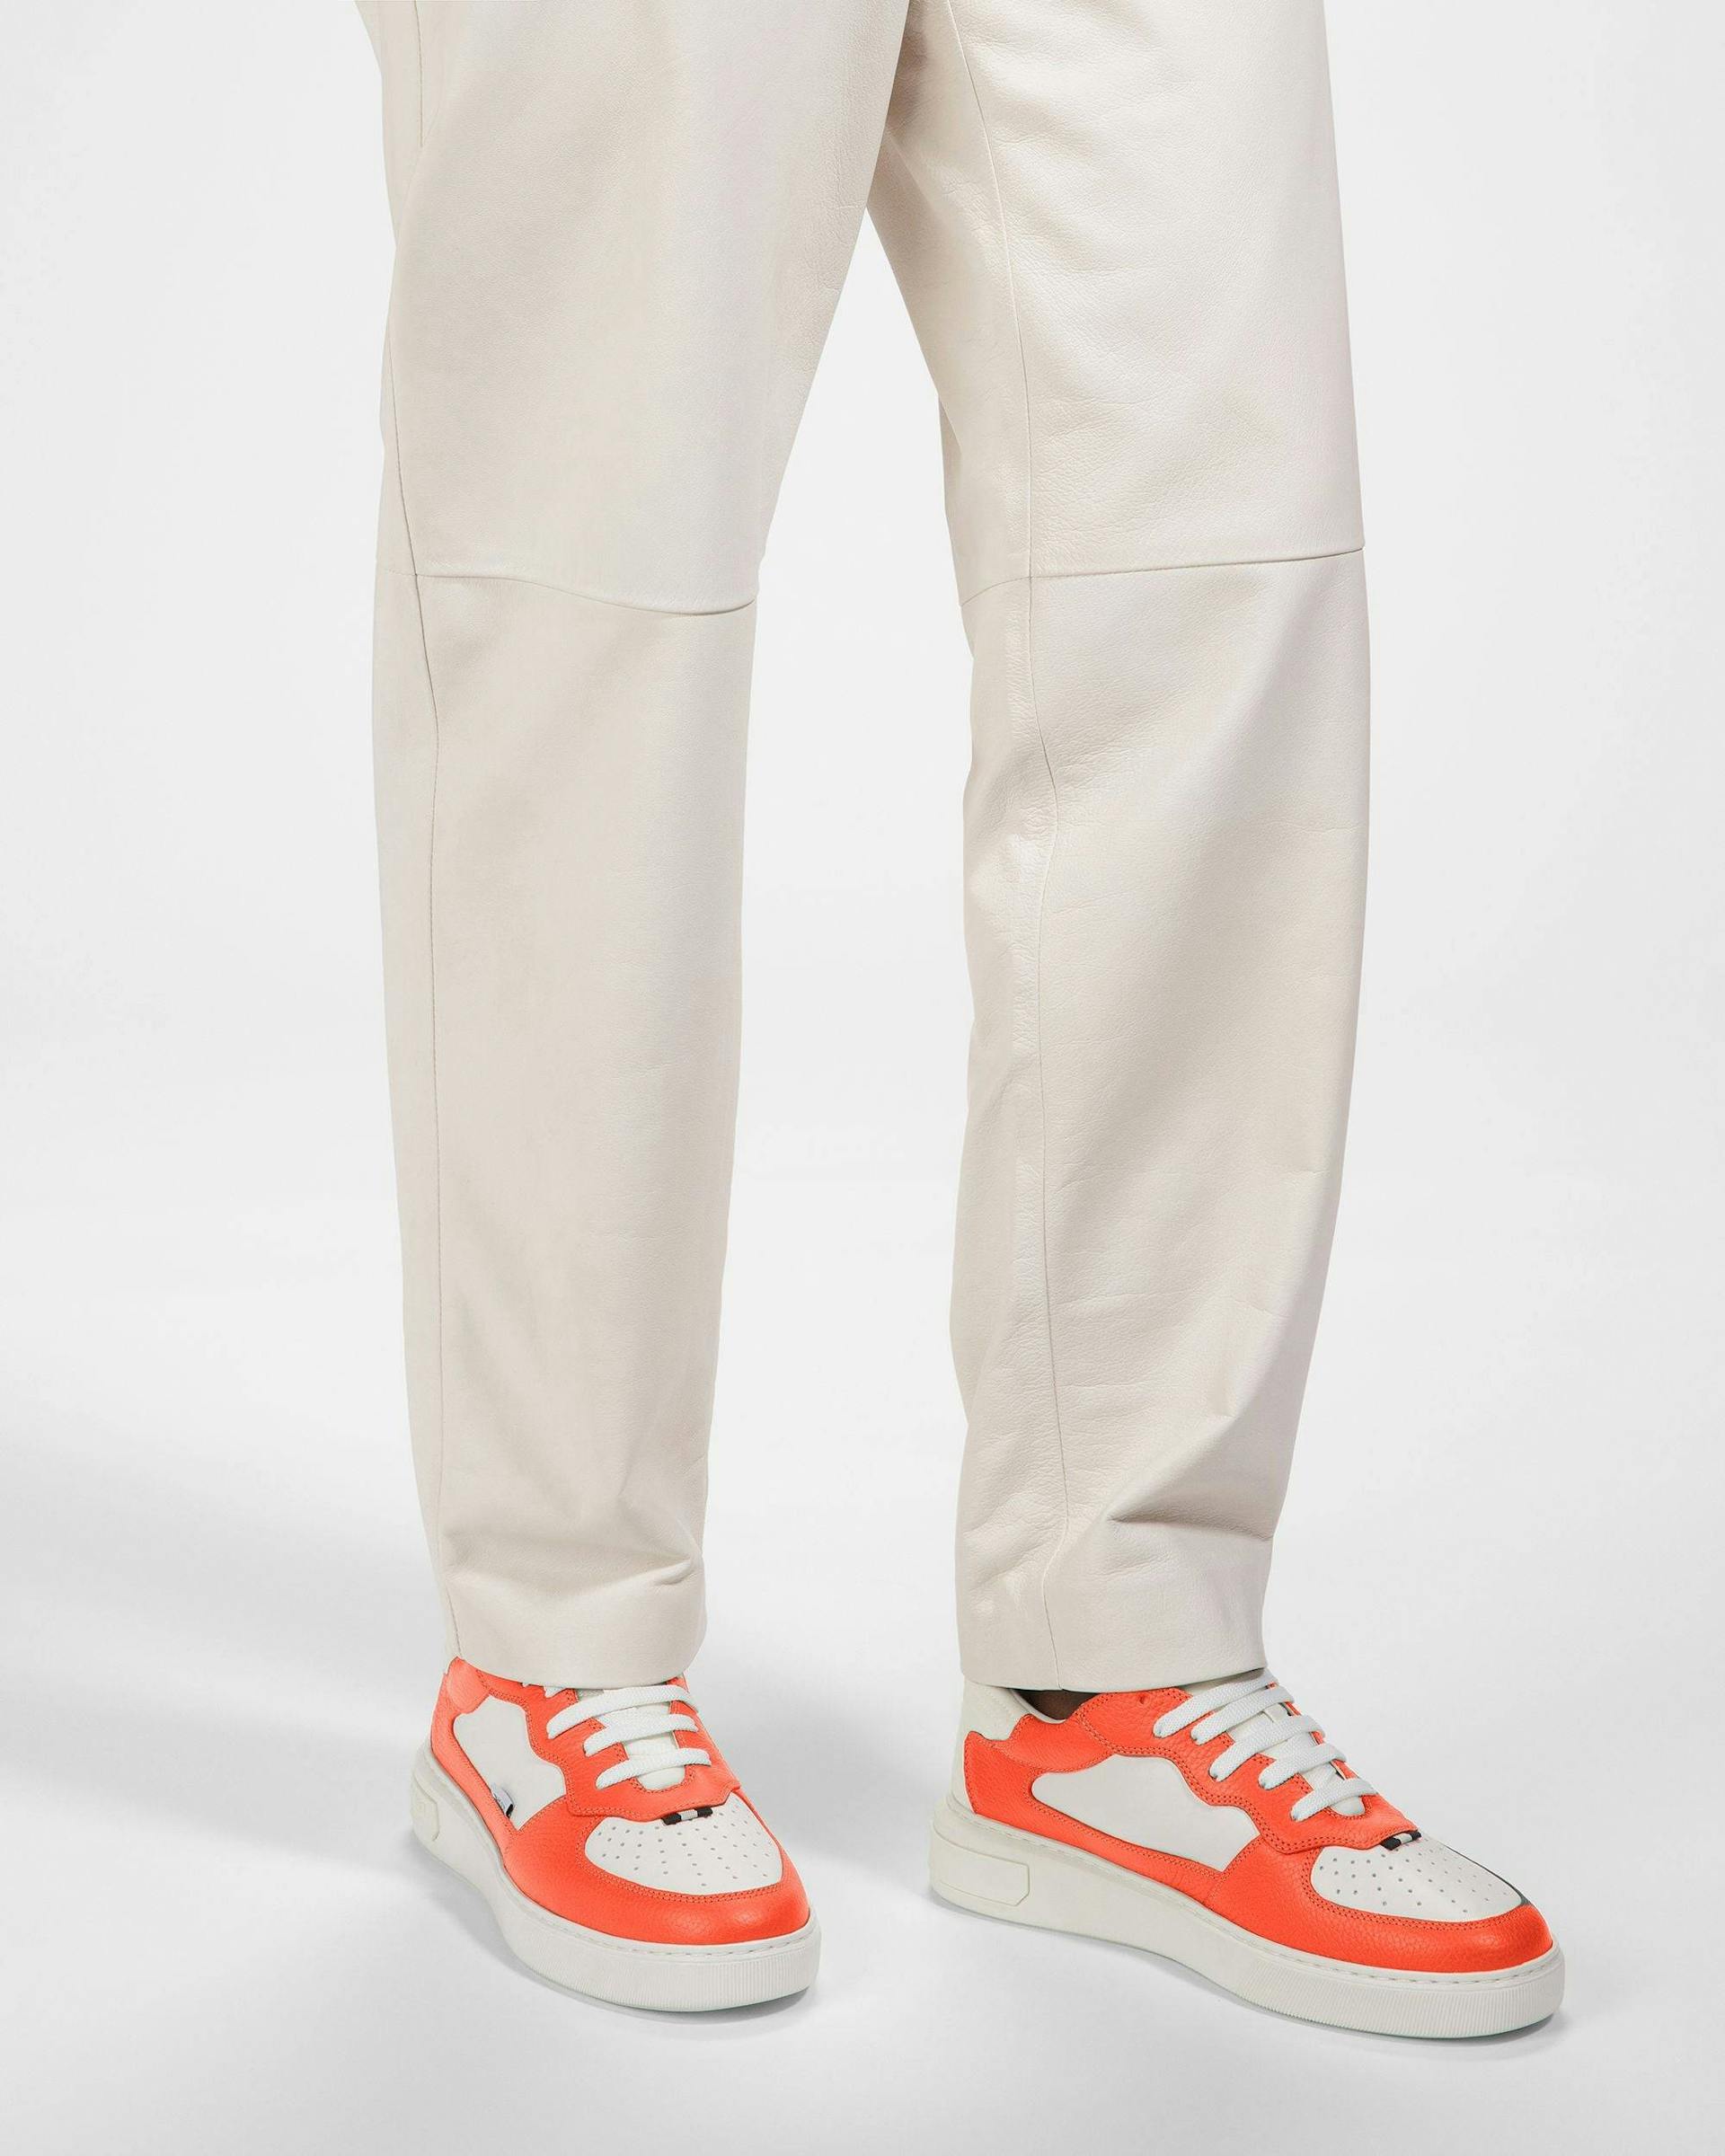 Mark Leather Sneakers In Orange And White - Men's - Bally - 07